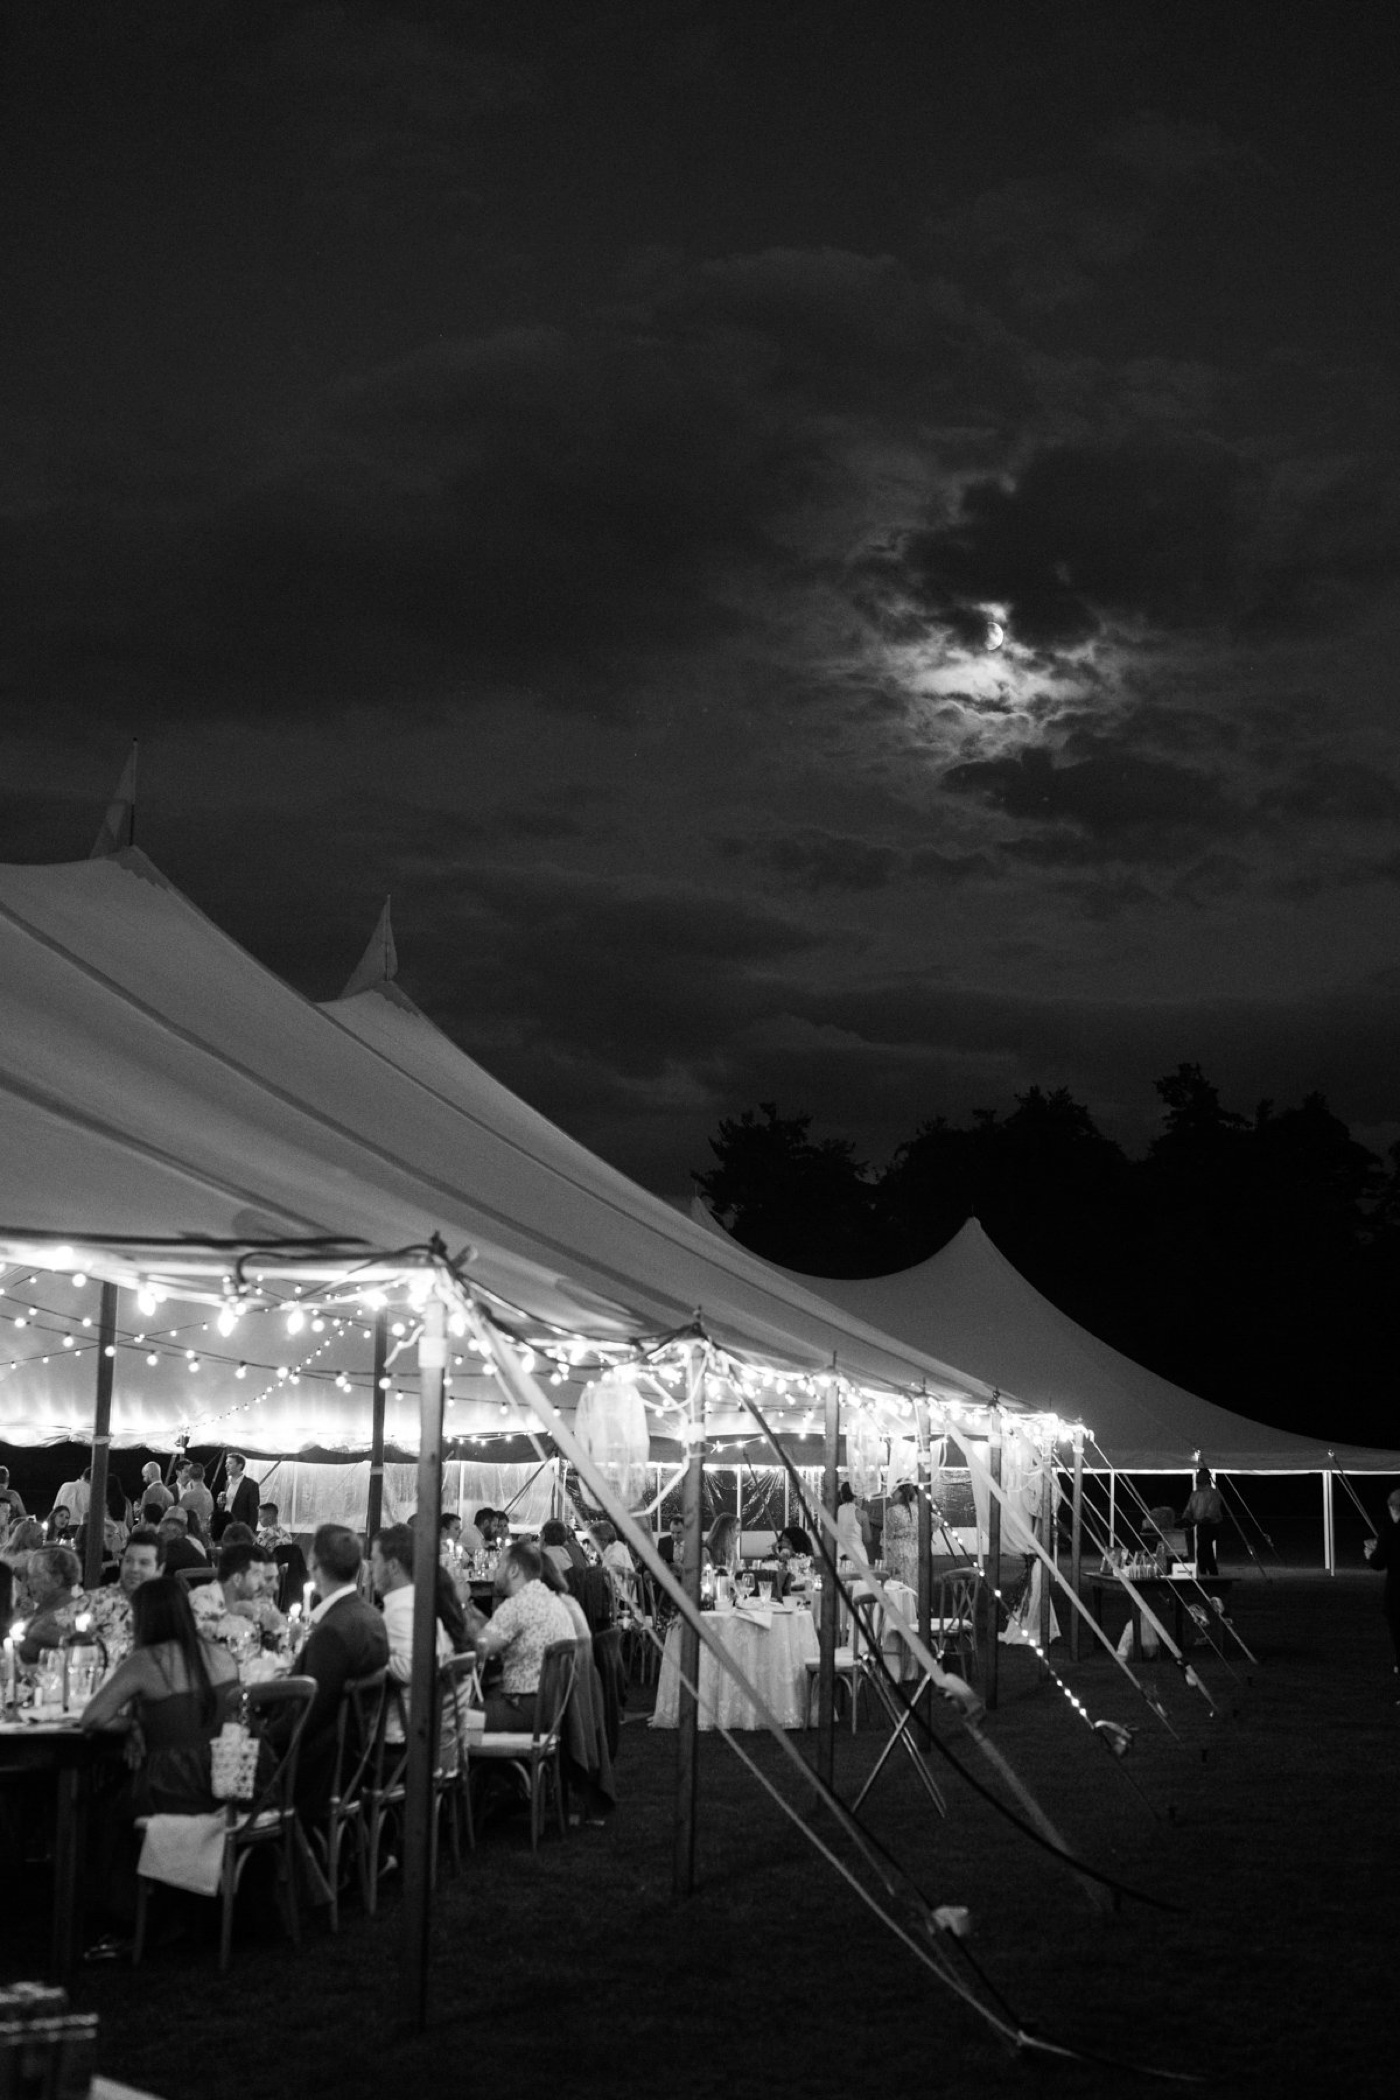 Outdoor tented wedding reception on the Palazzo Field at Brewster Academy